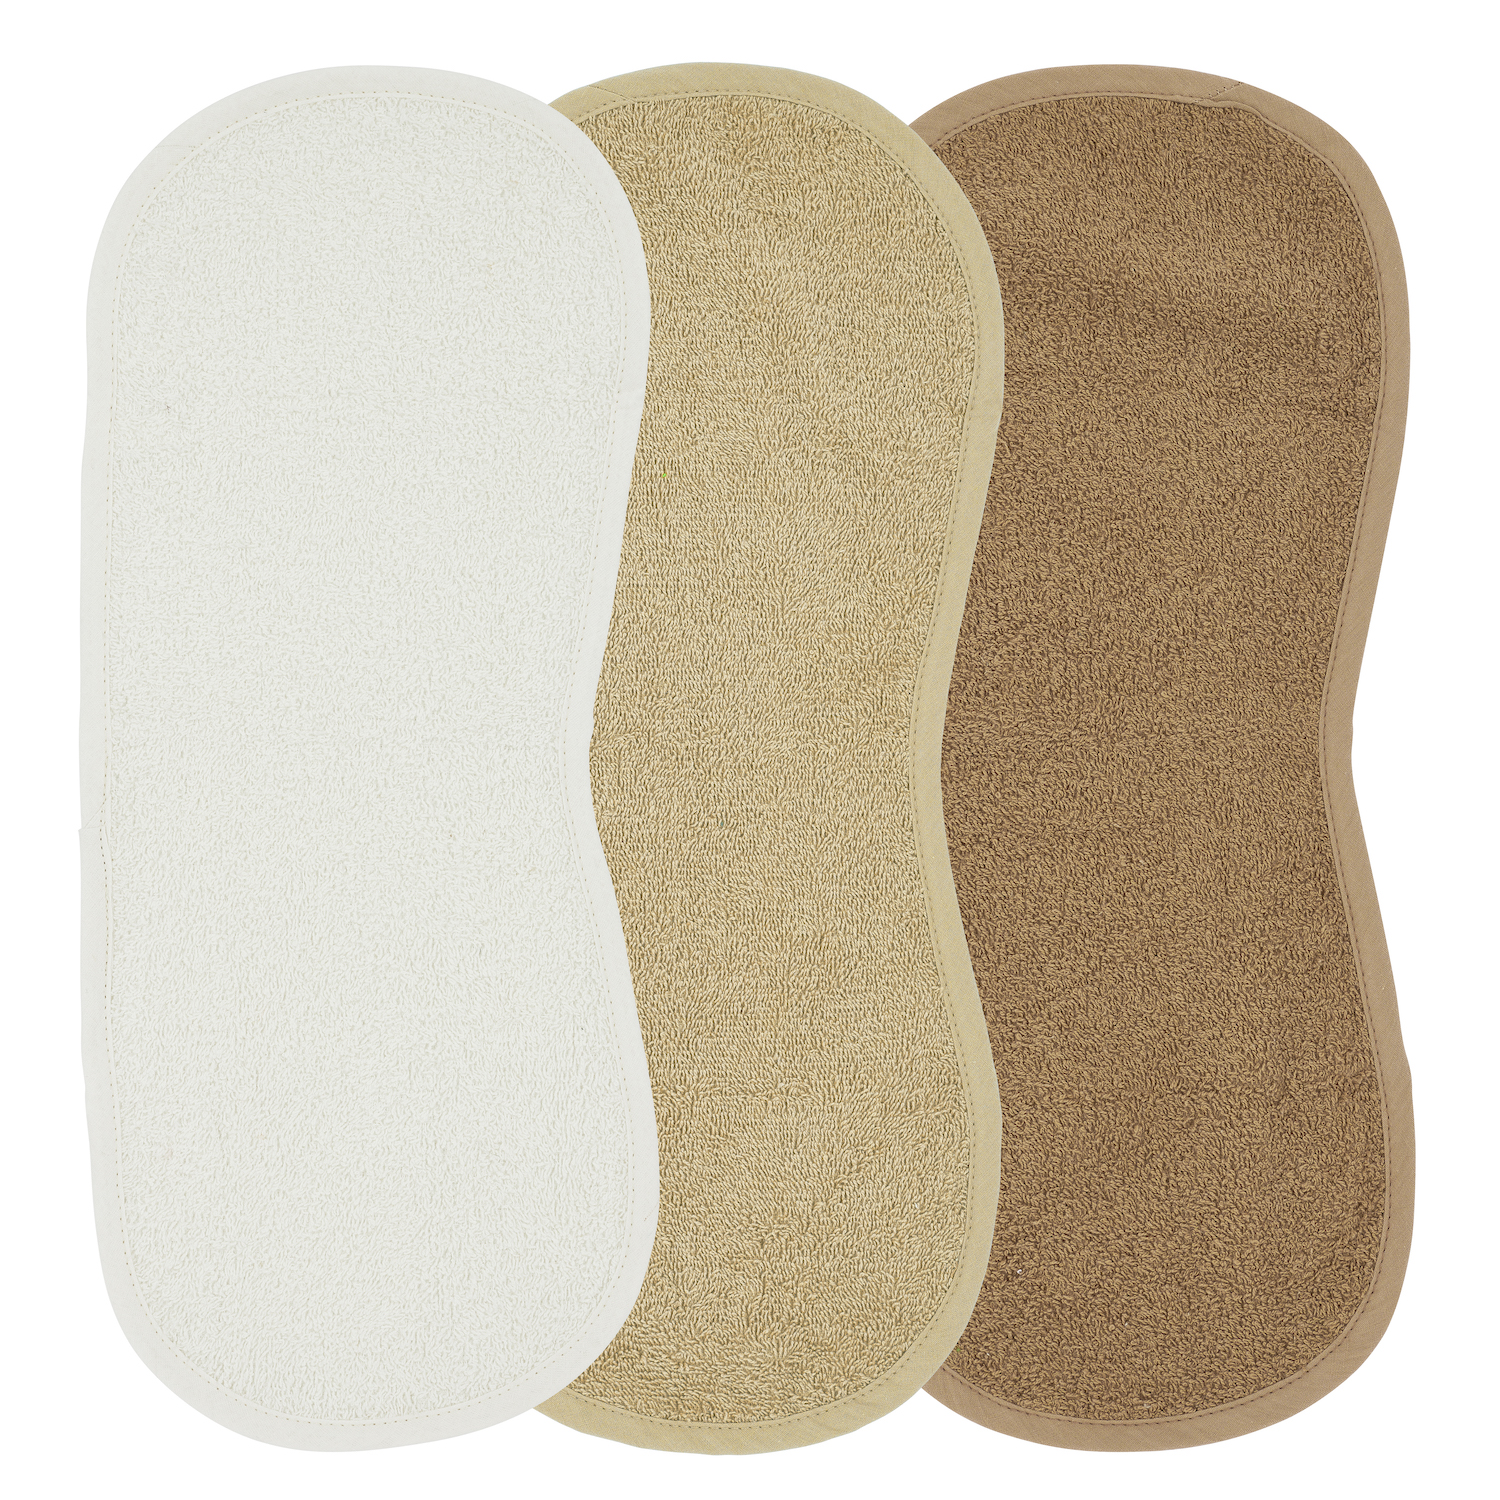 Spucktuch 3er pack frottee Uni - offwhite/sand/toffee - 53x20cm